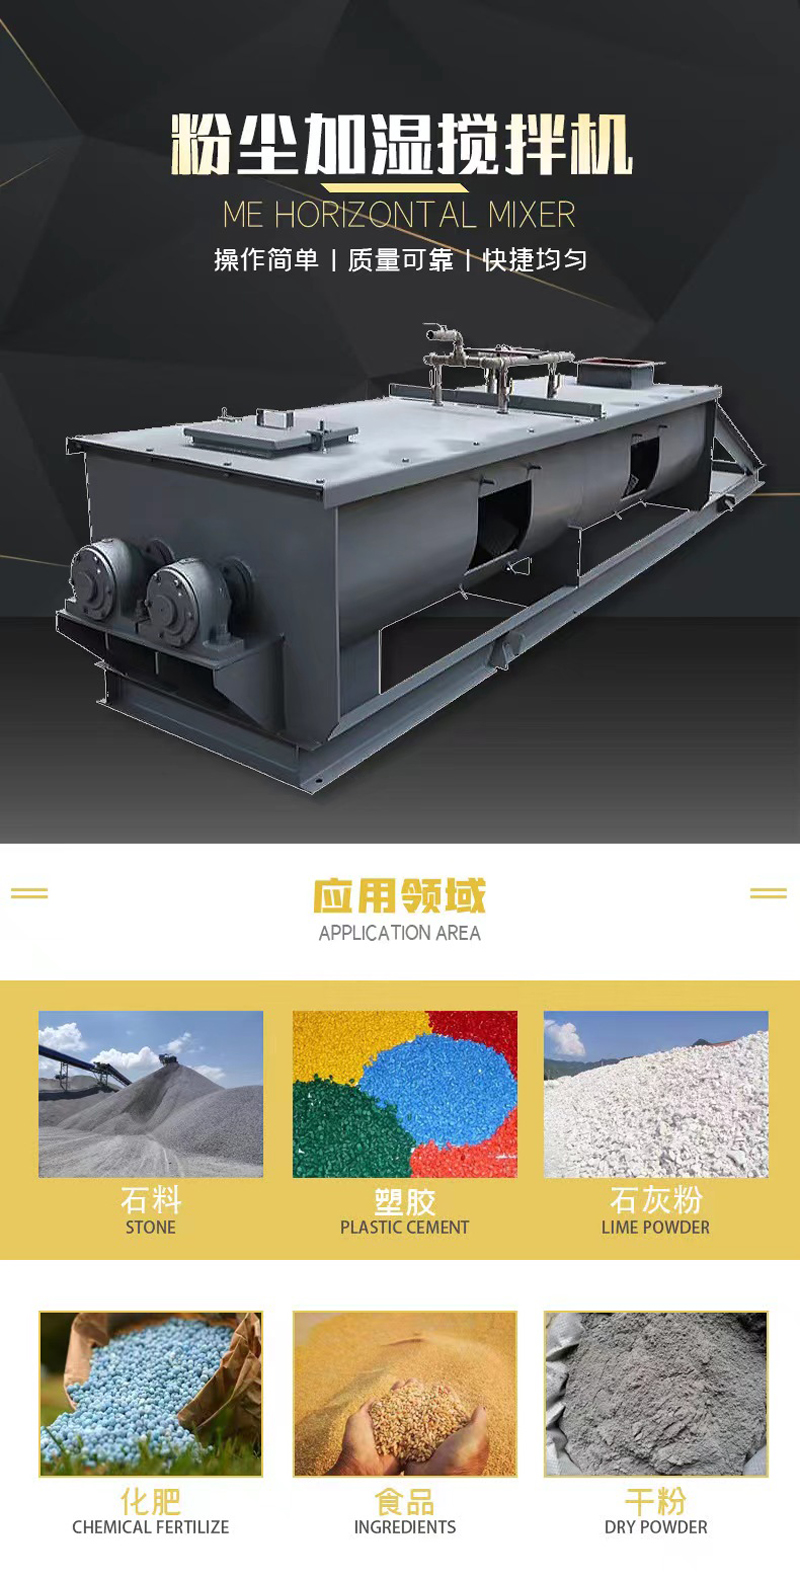 Dust humidification mixer, single and double shaft SJ horizontal spiral mixer, industrial power plant cement mortar mixing